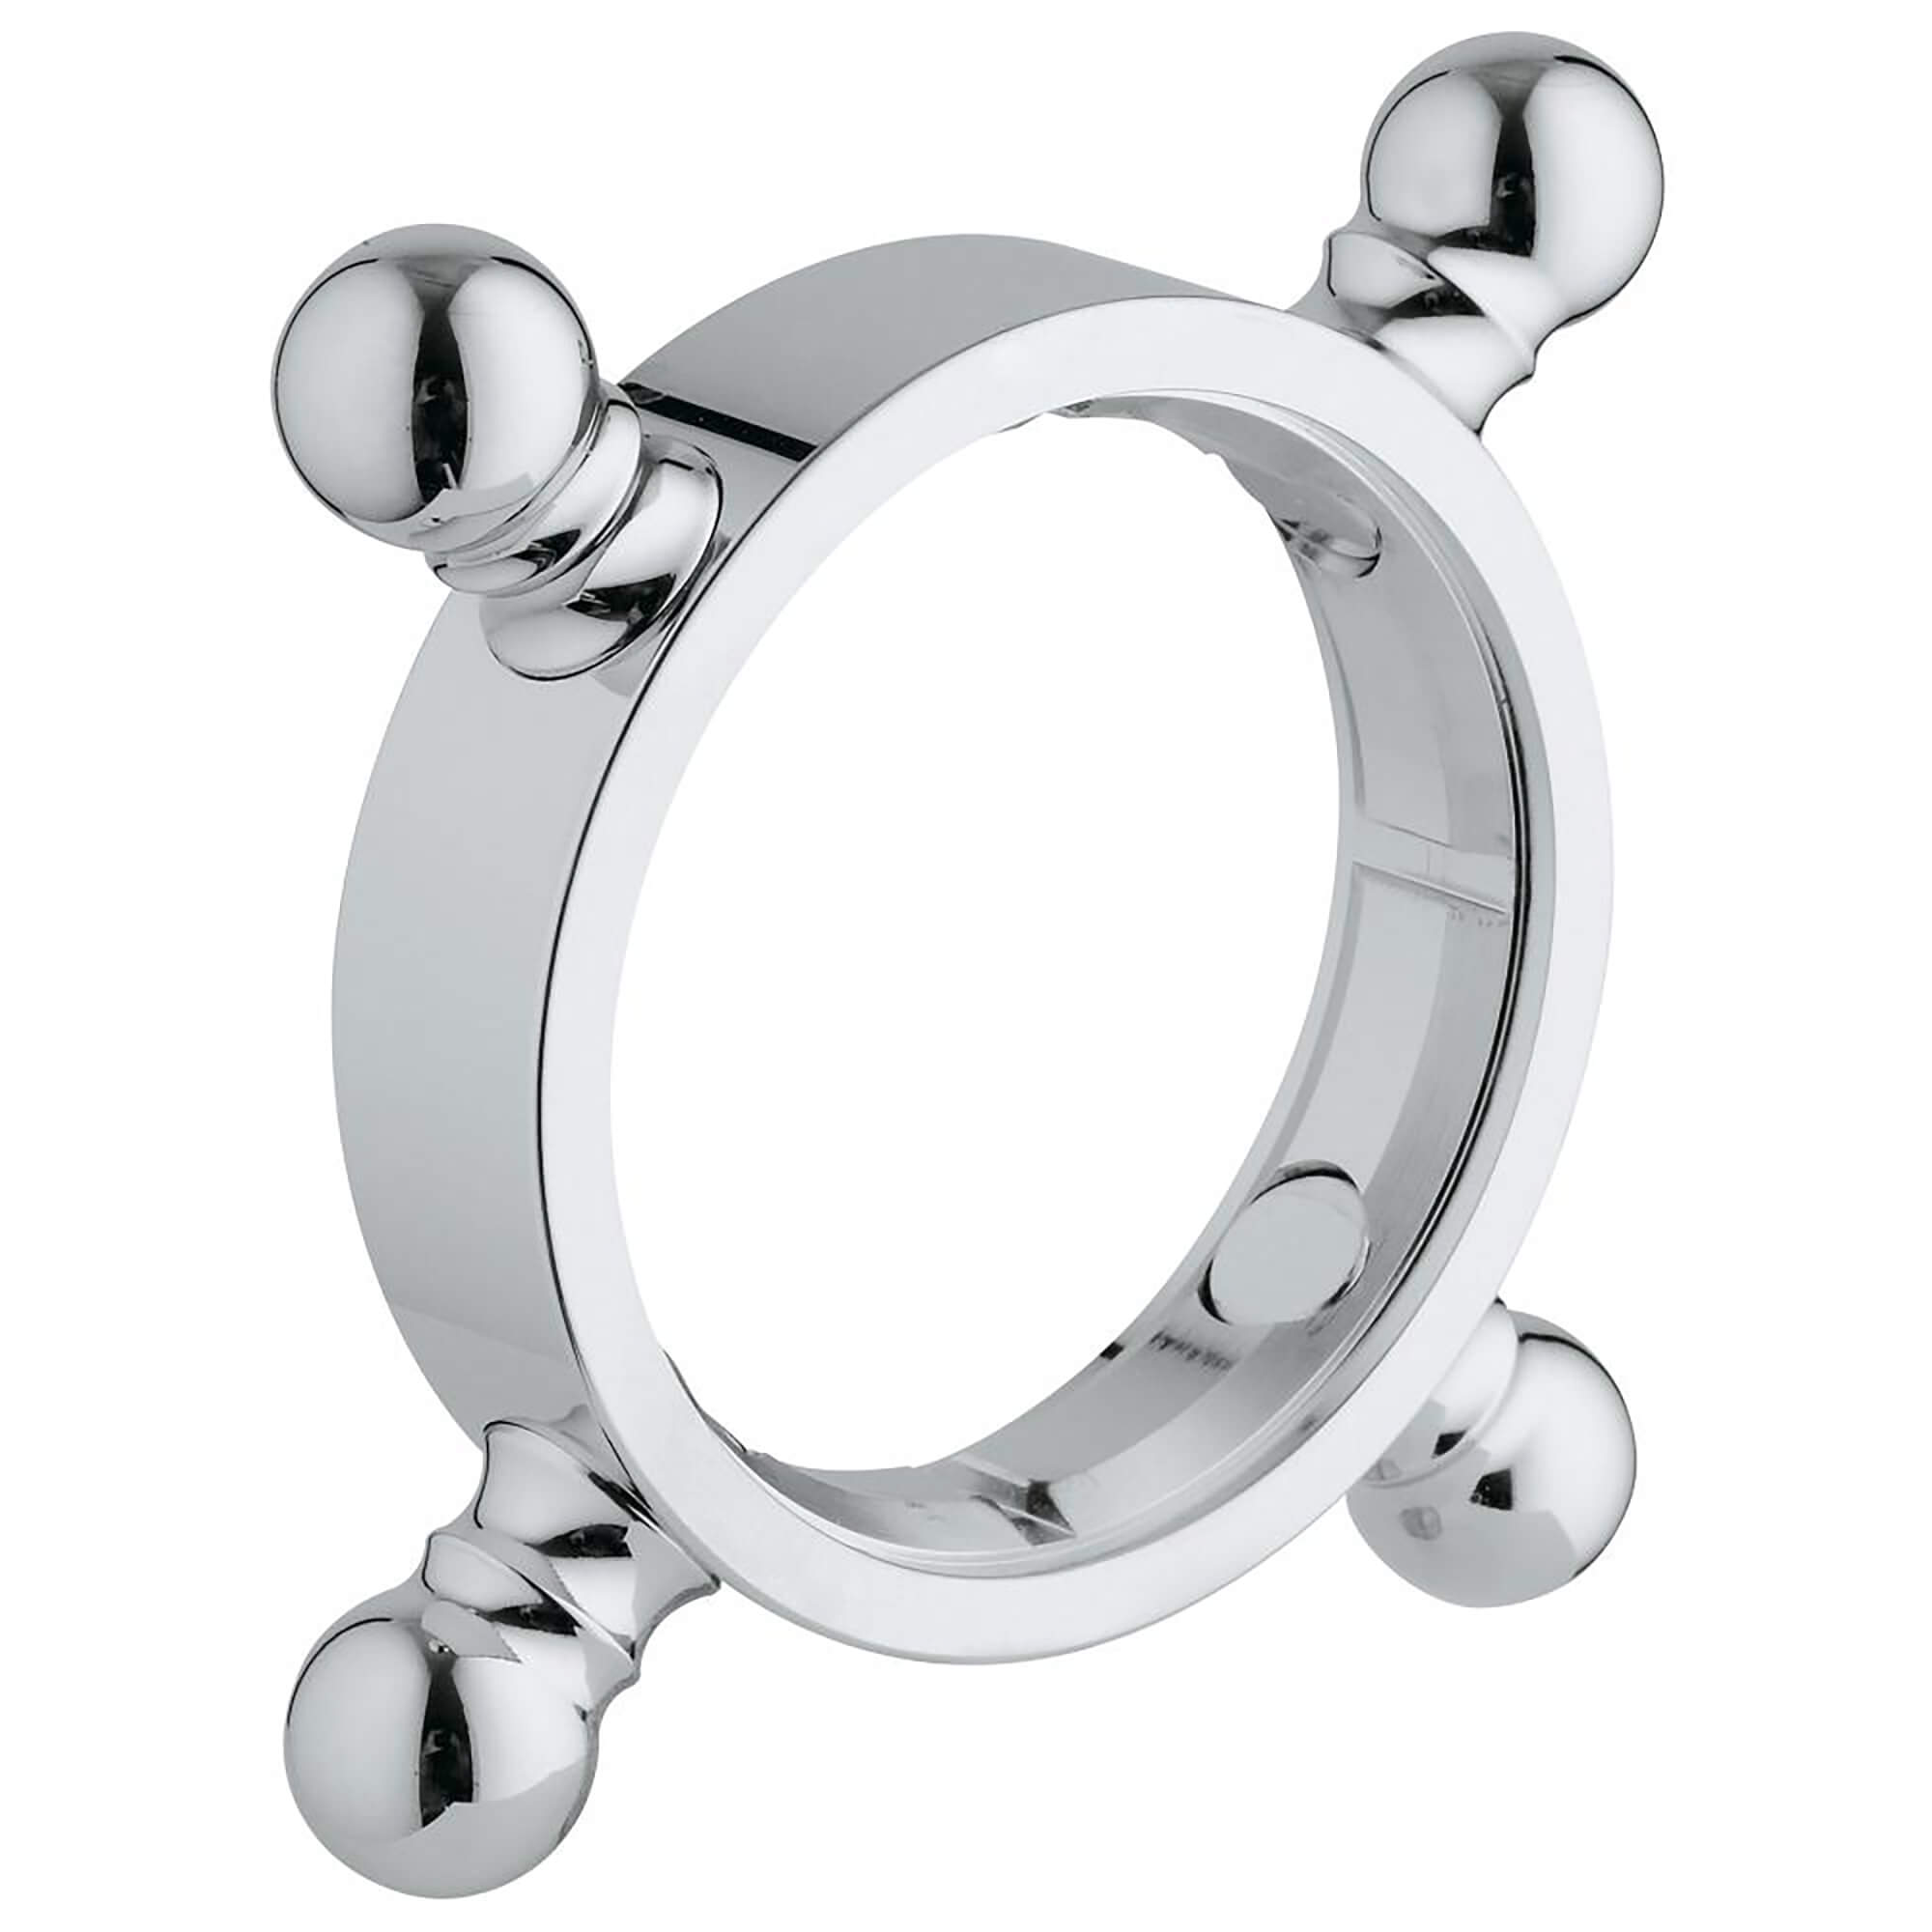 Decoration cross handle ring GROHE CHROME